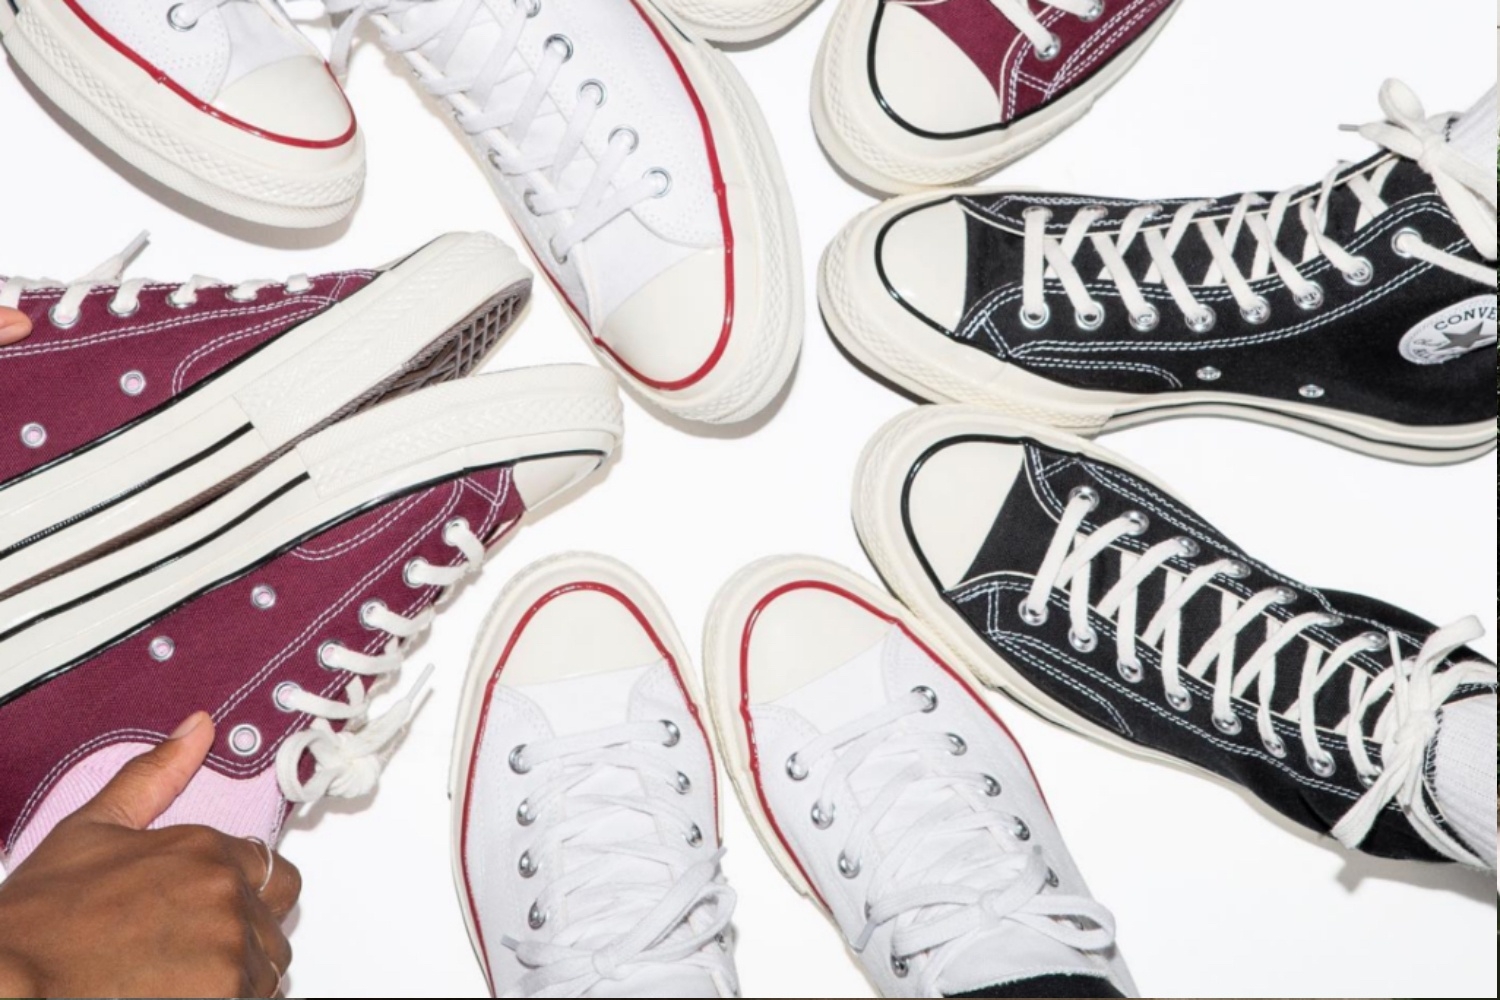 How to style the Converse Chuck High